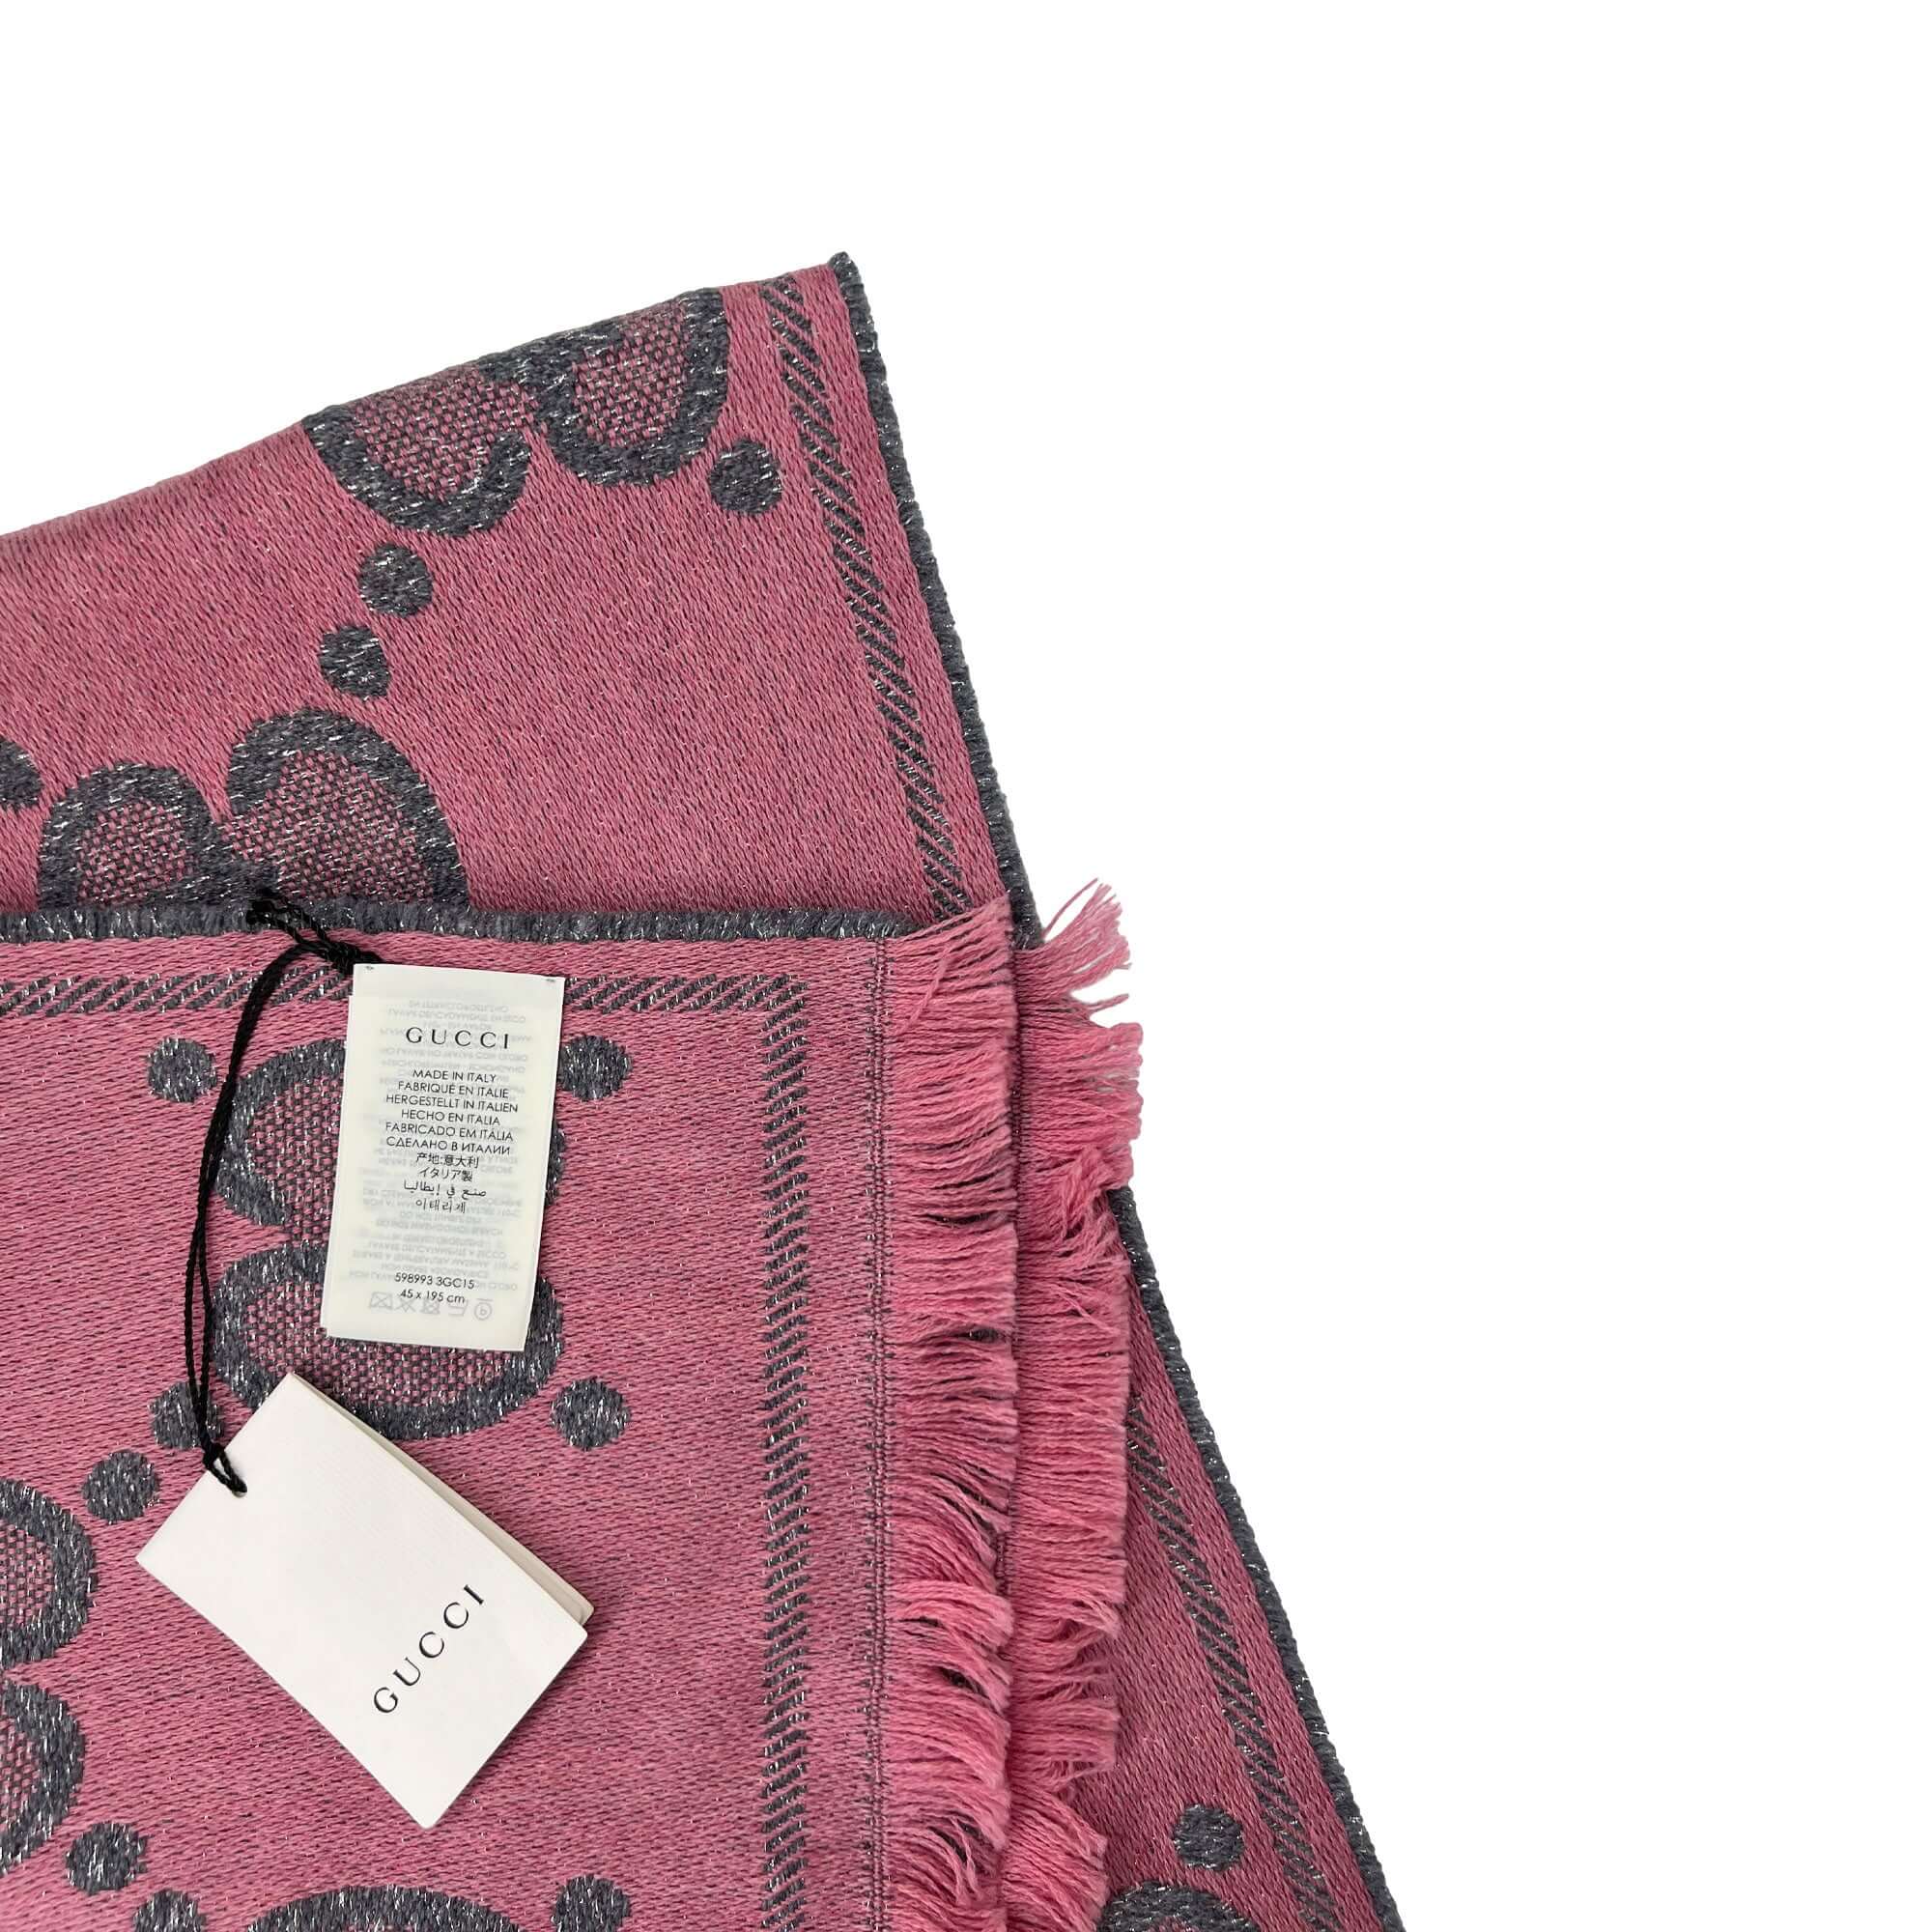 Gucci grey and pink GG logo scarf